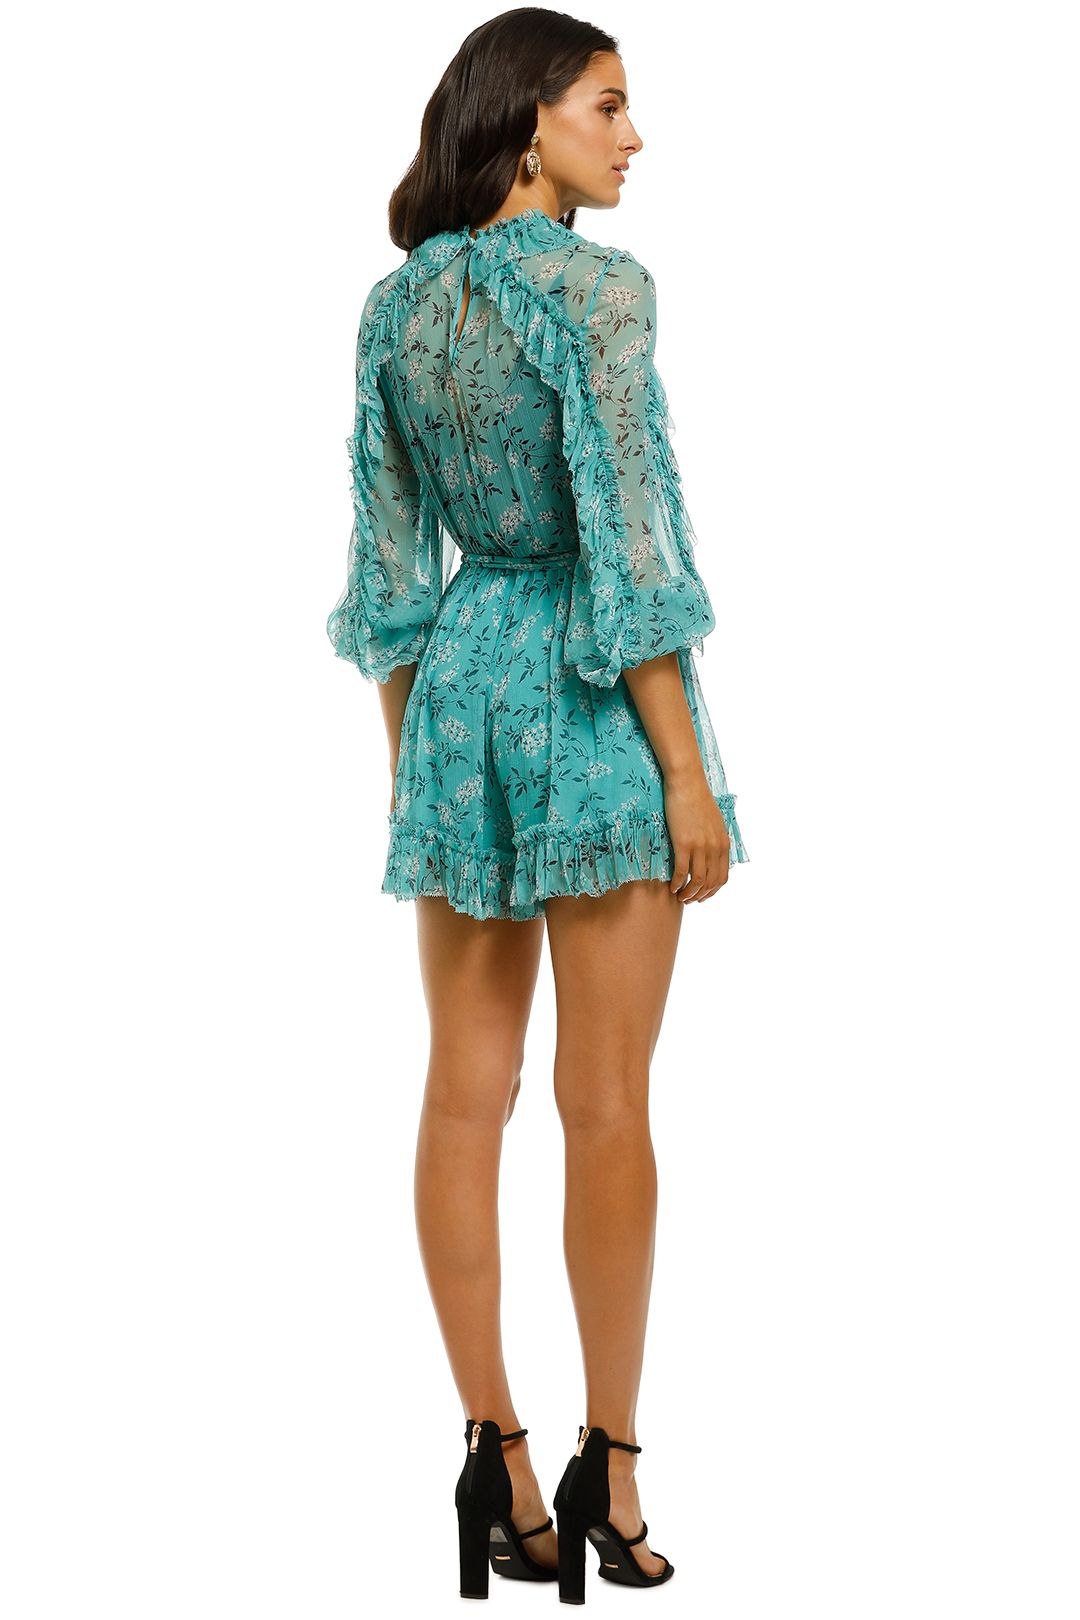 Zimmermann-Moncur-Ruffle-Playsuit-Turquoise-Back